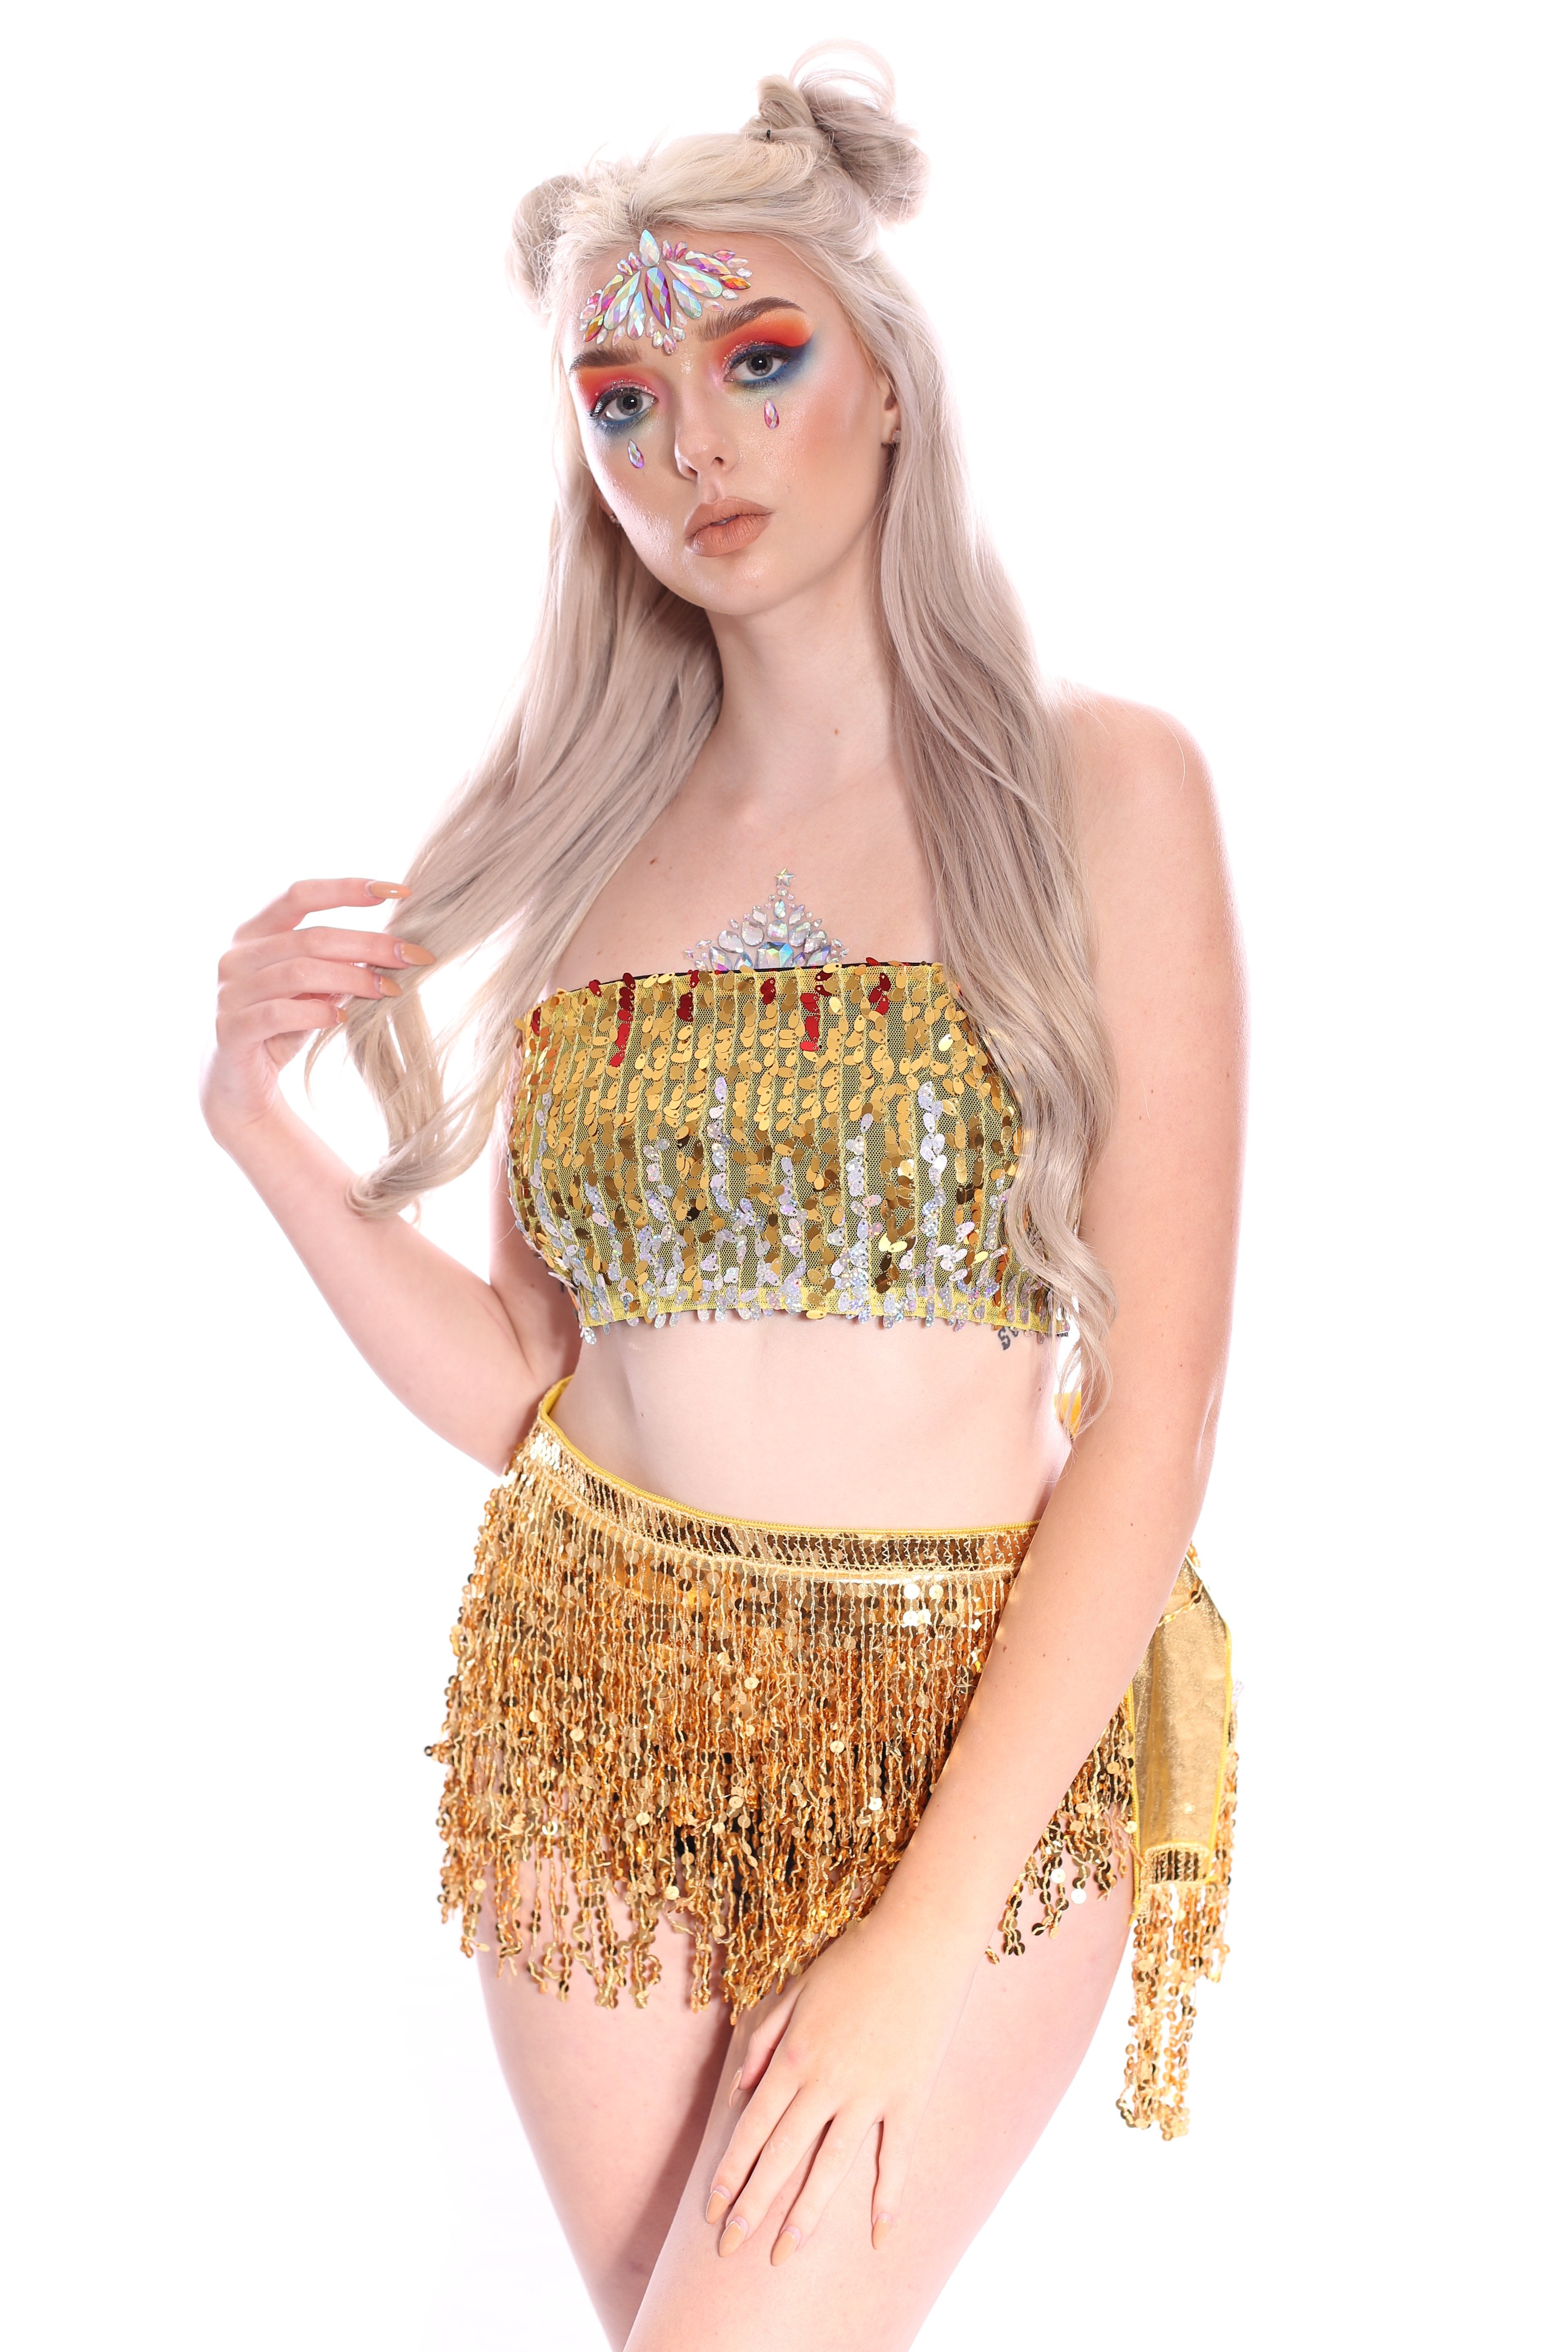 Holographic Sequin Skirt - Funky Rhythm